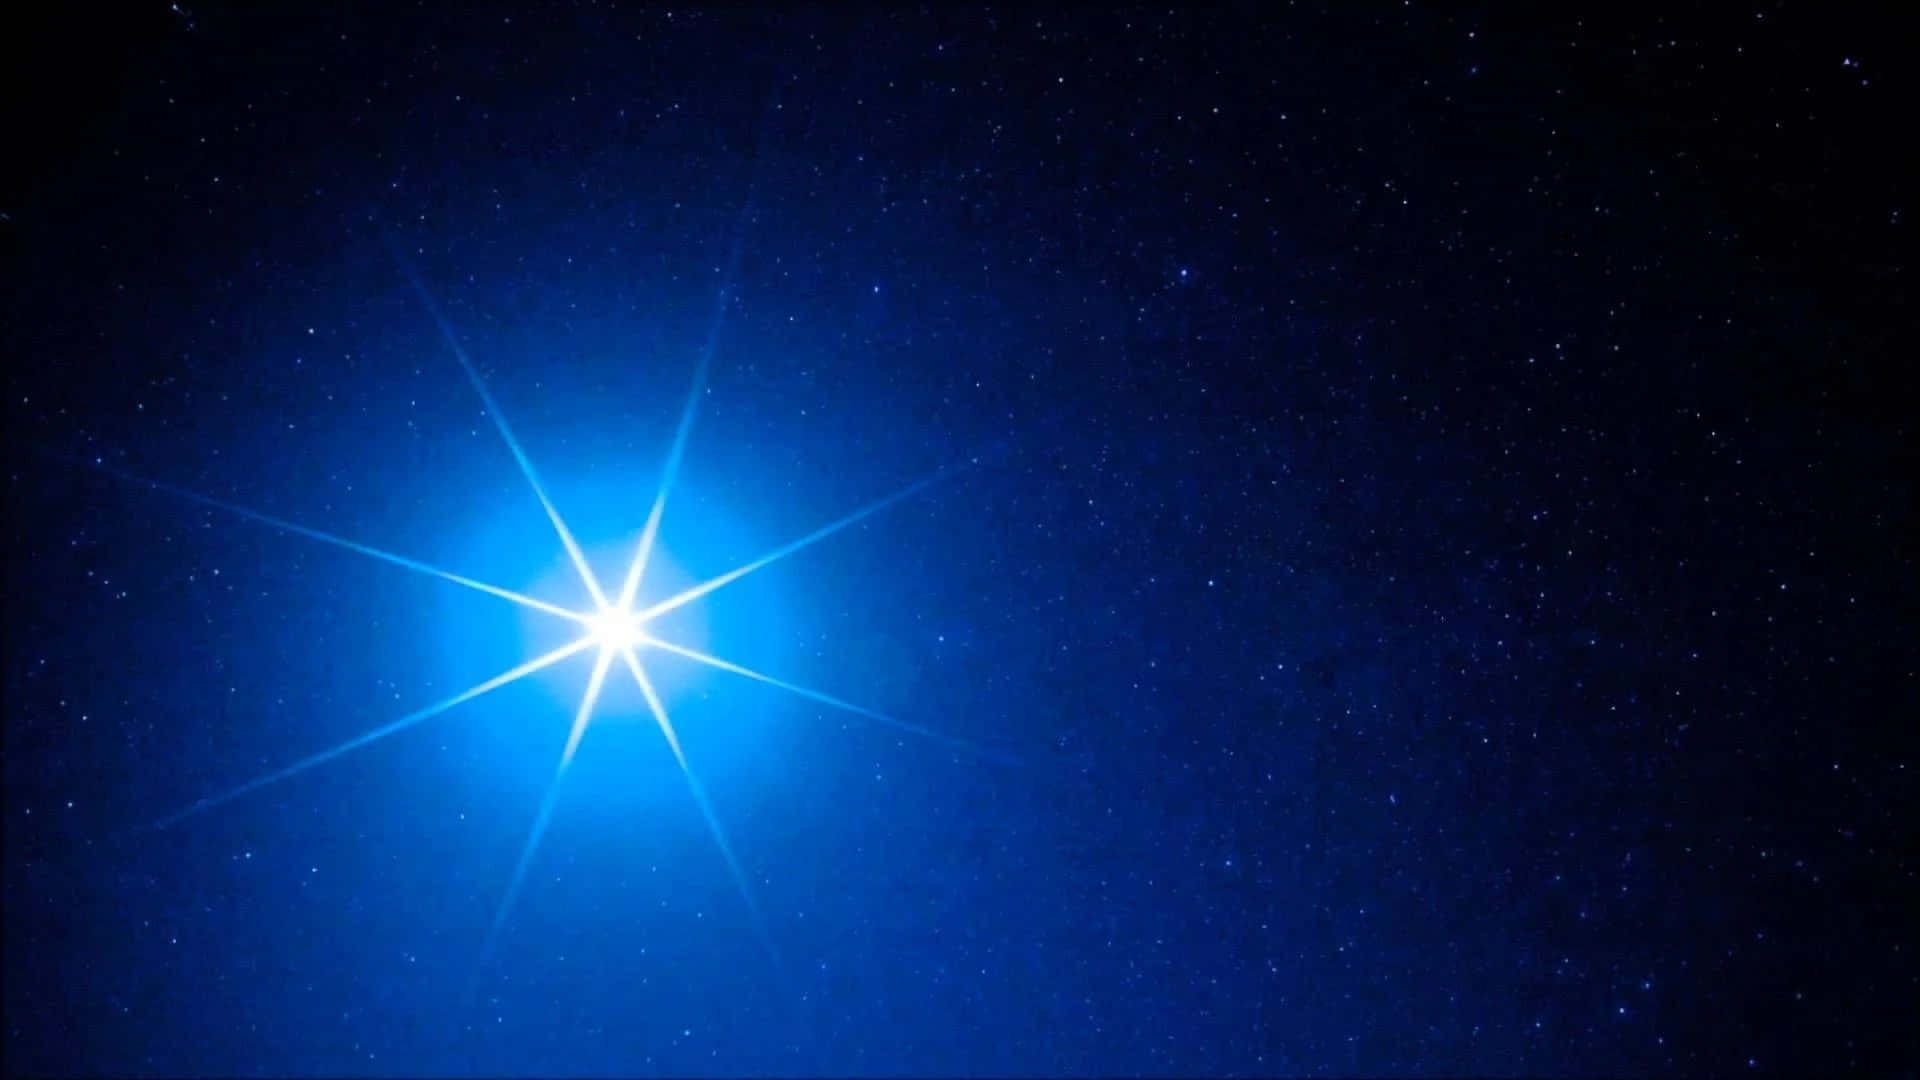 A Blue Star In The Sky With A Star In The Middle